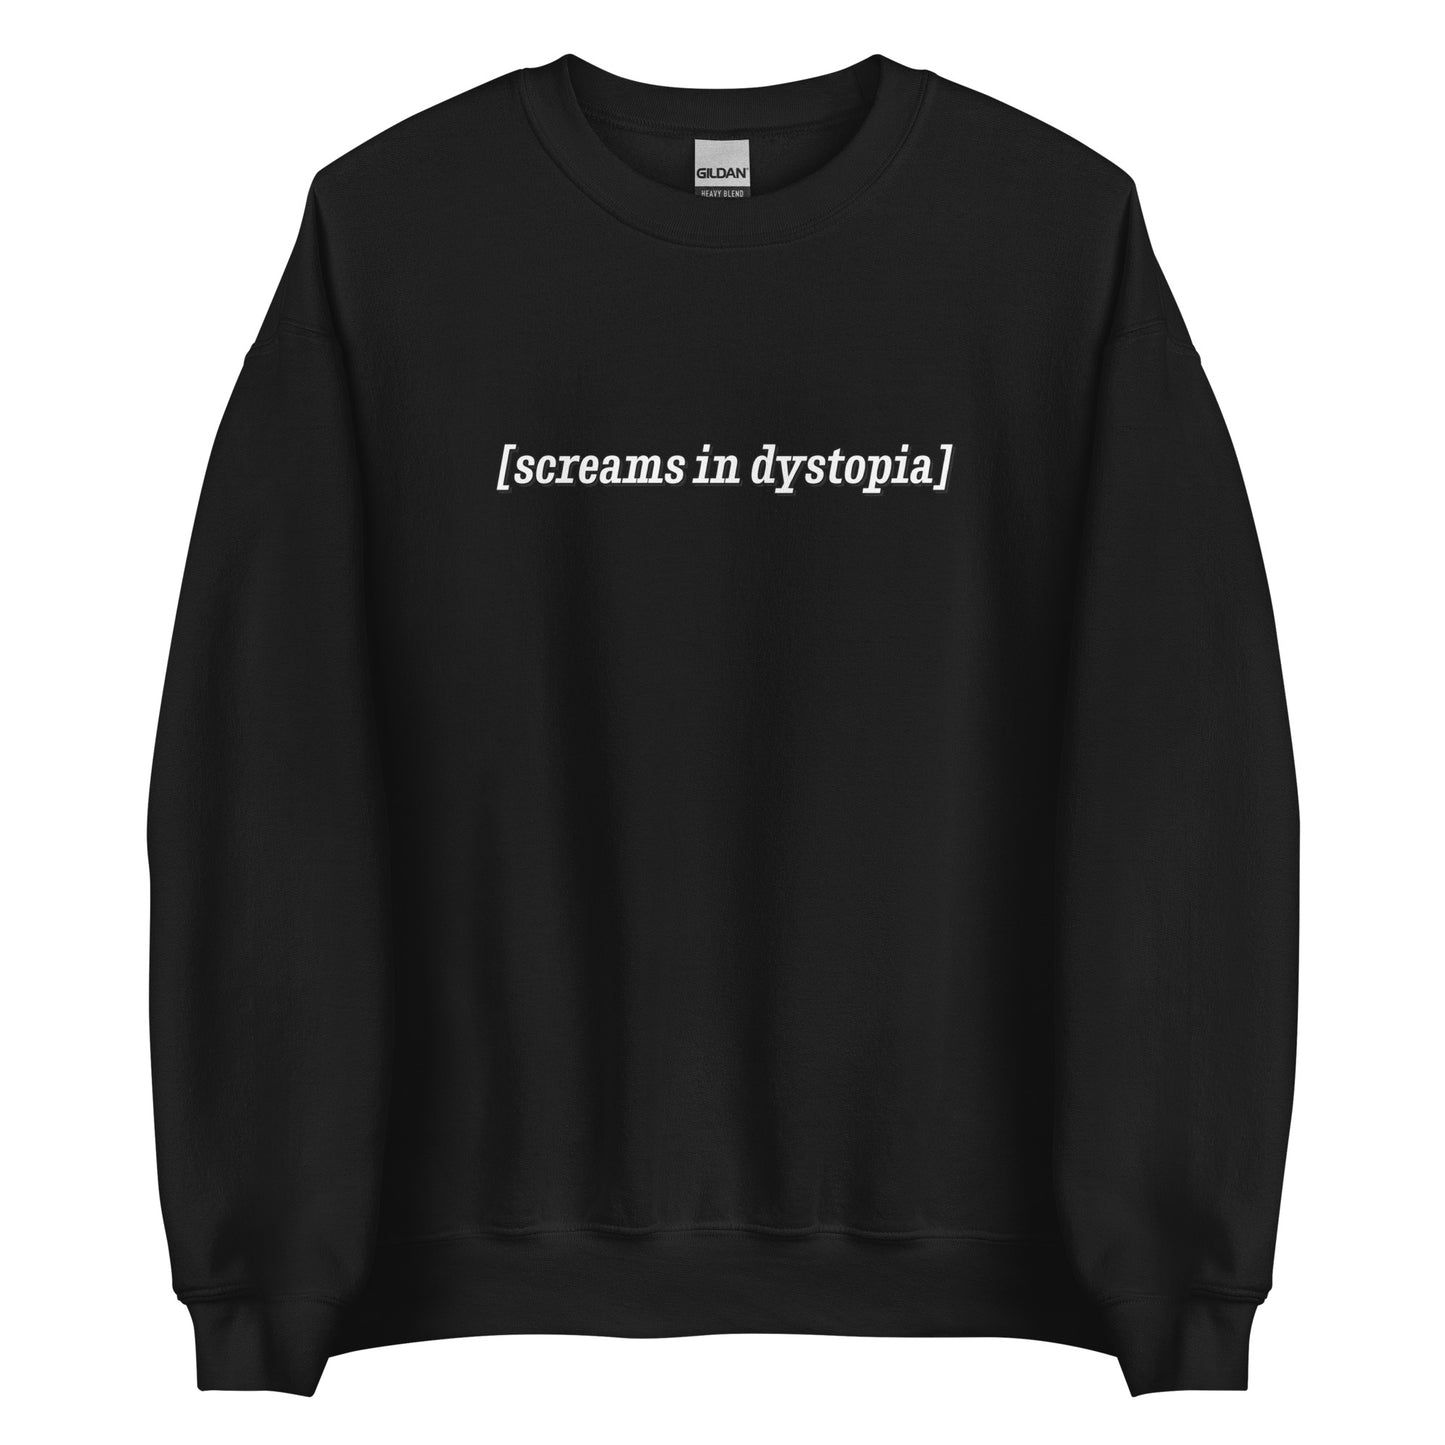 A black crewneck sweatshirt with white text in the style of subtitles. The text reads "[screams in dystopia]".